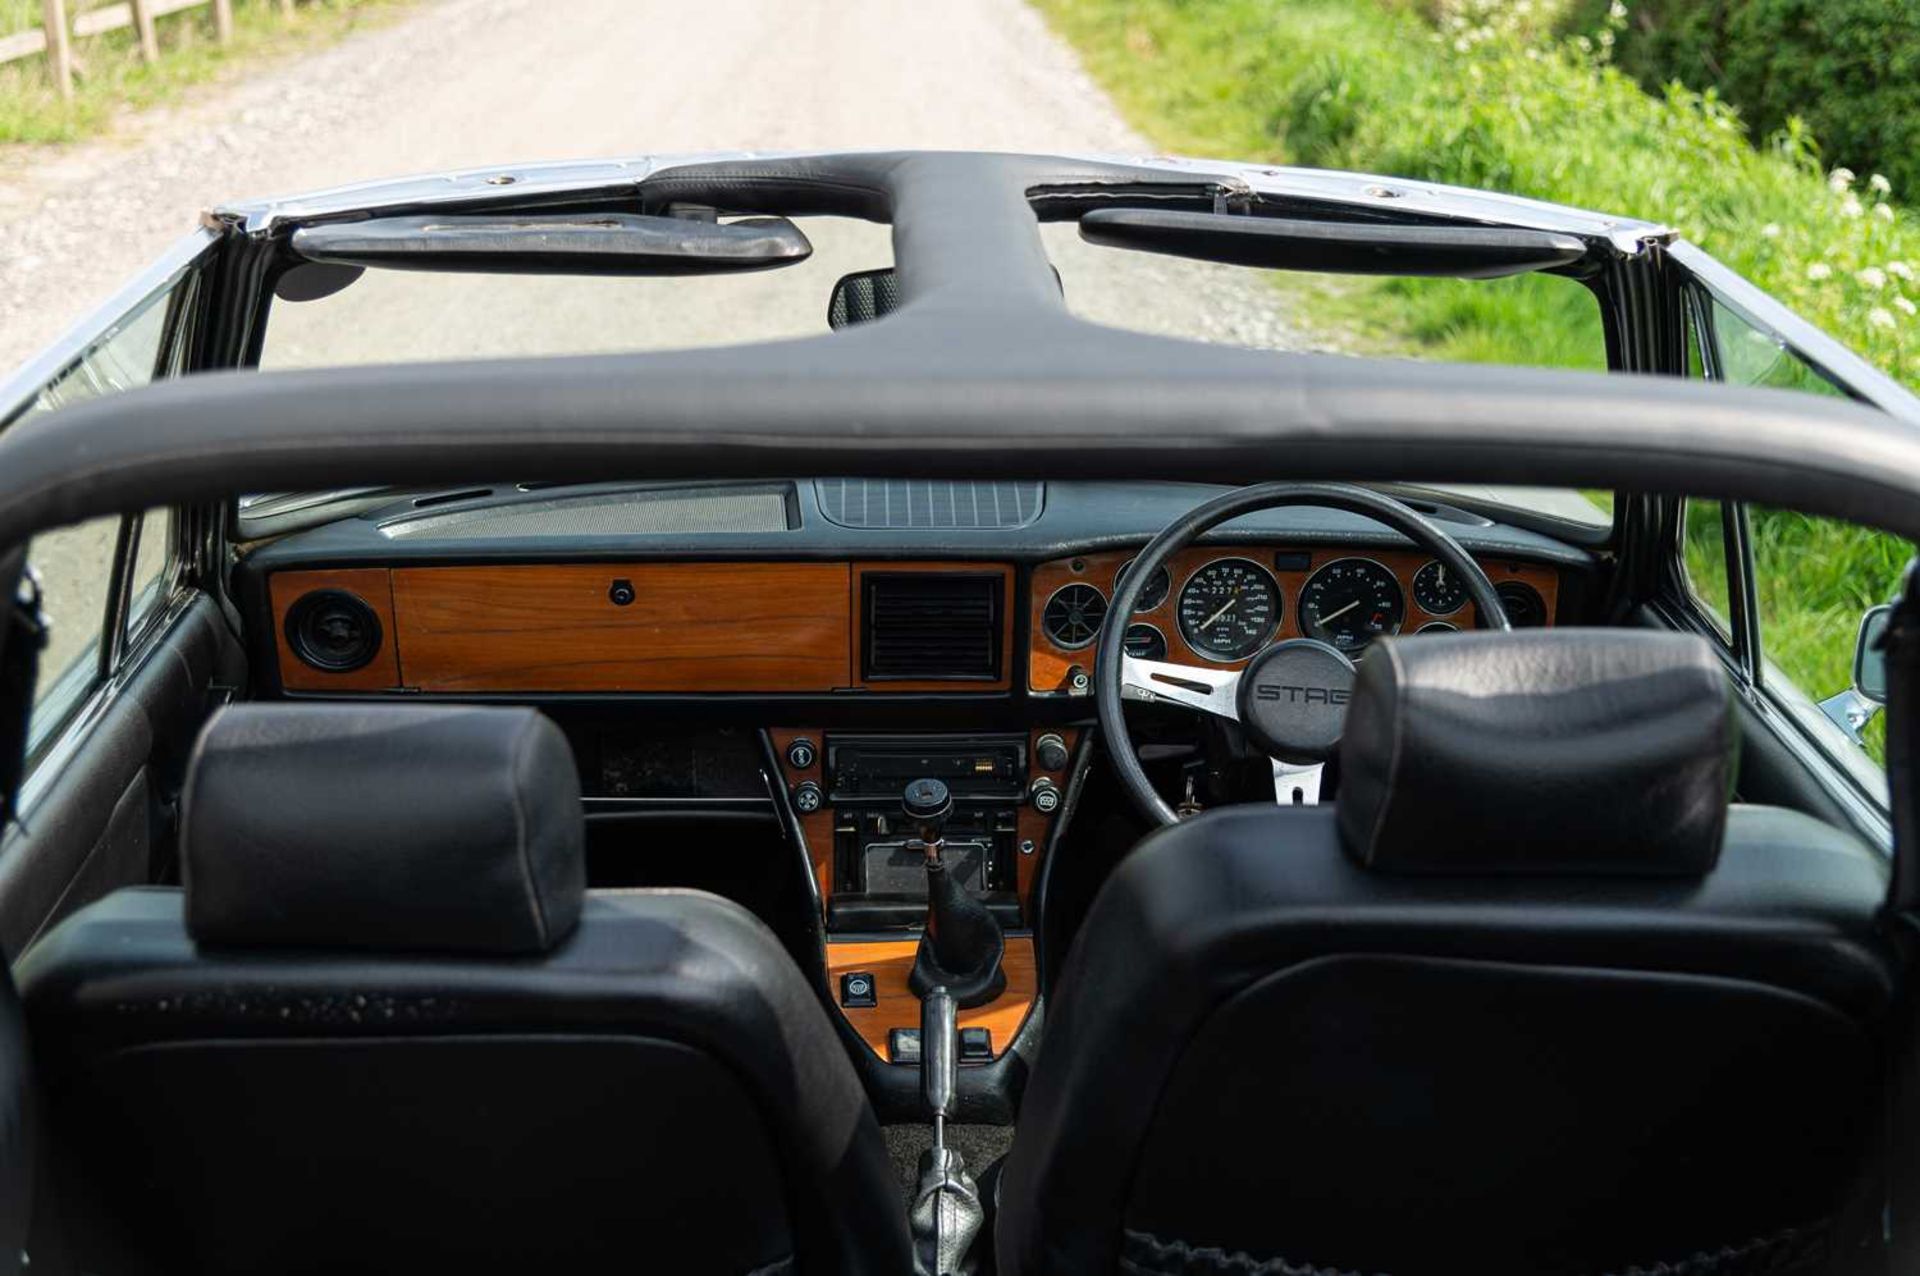 1974 Triumph Stag ***NO RESERVE*** Fully-restored example, equipped with manual overdrive transmissi - Image 69 of 83